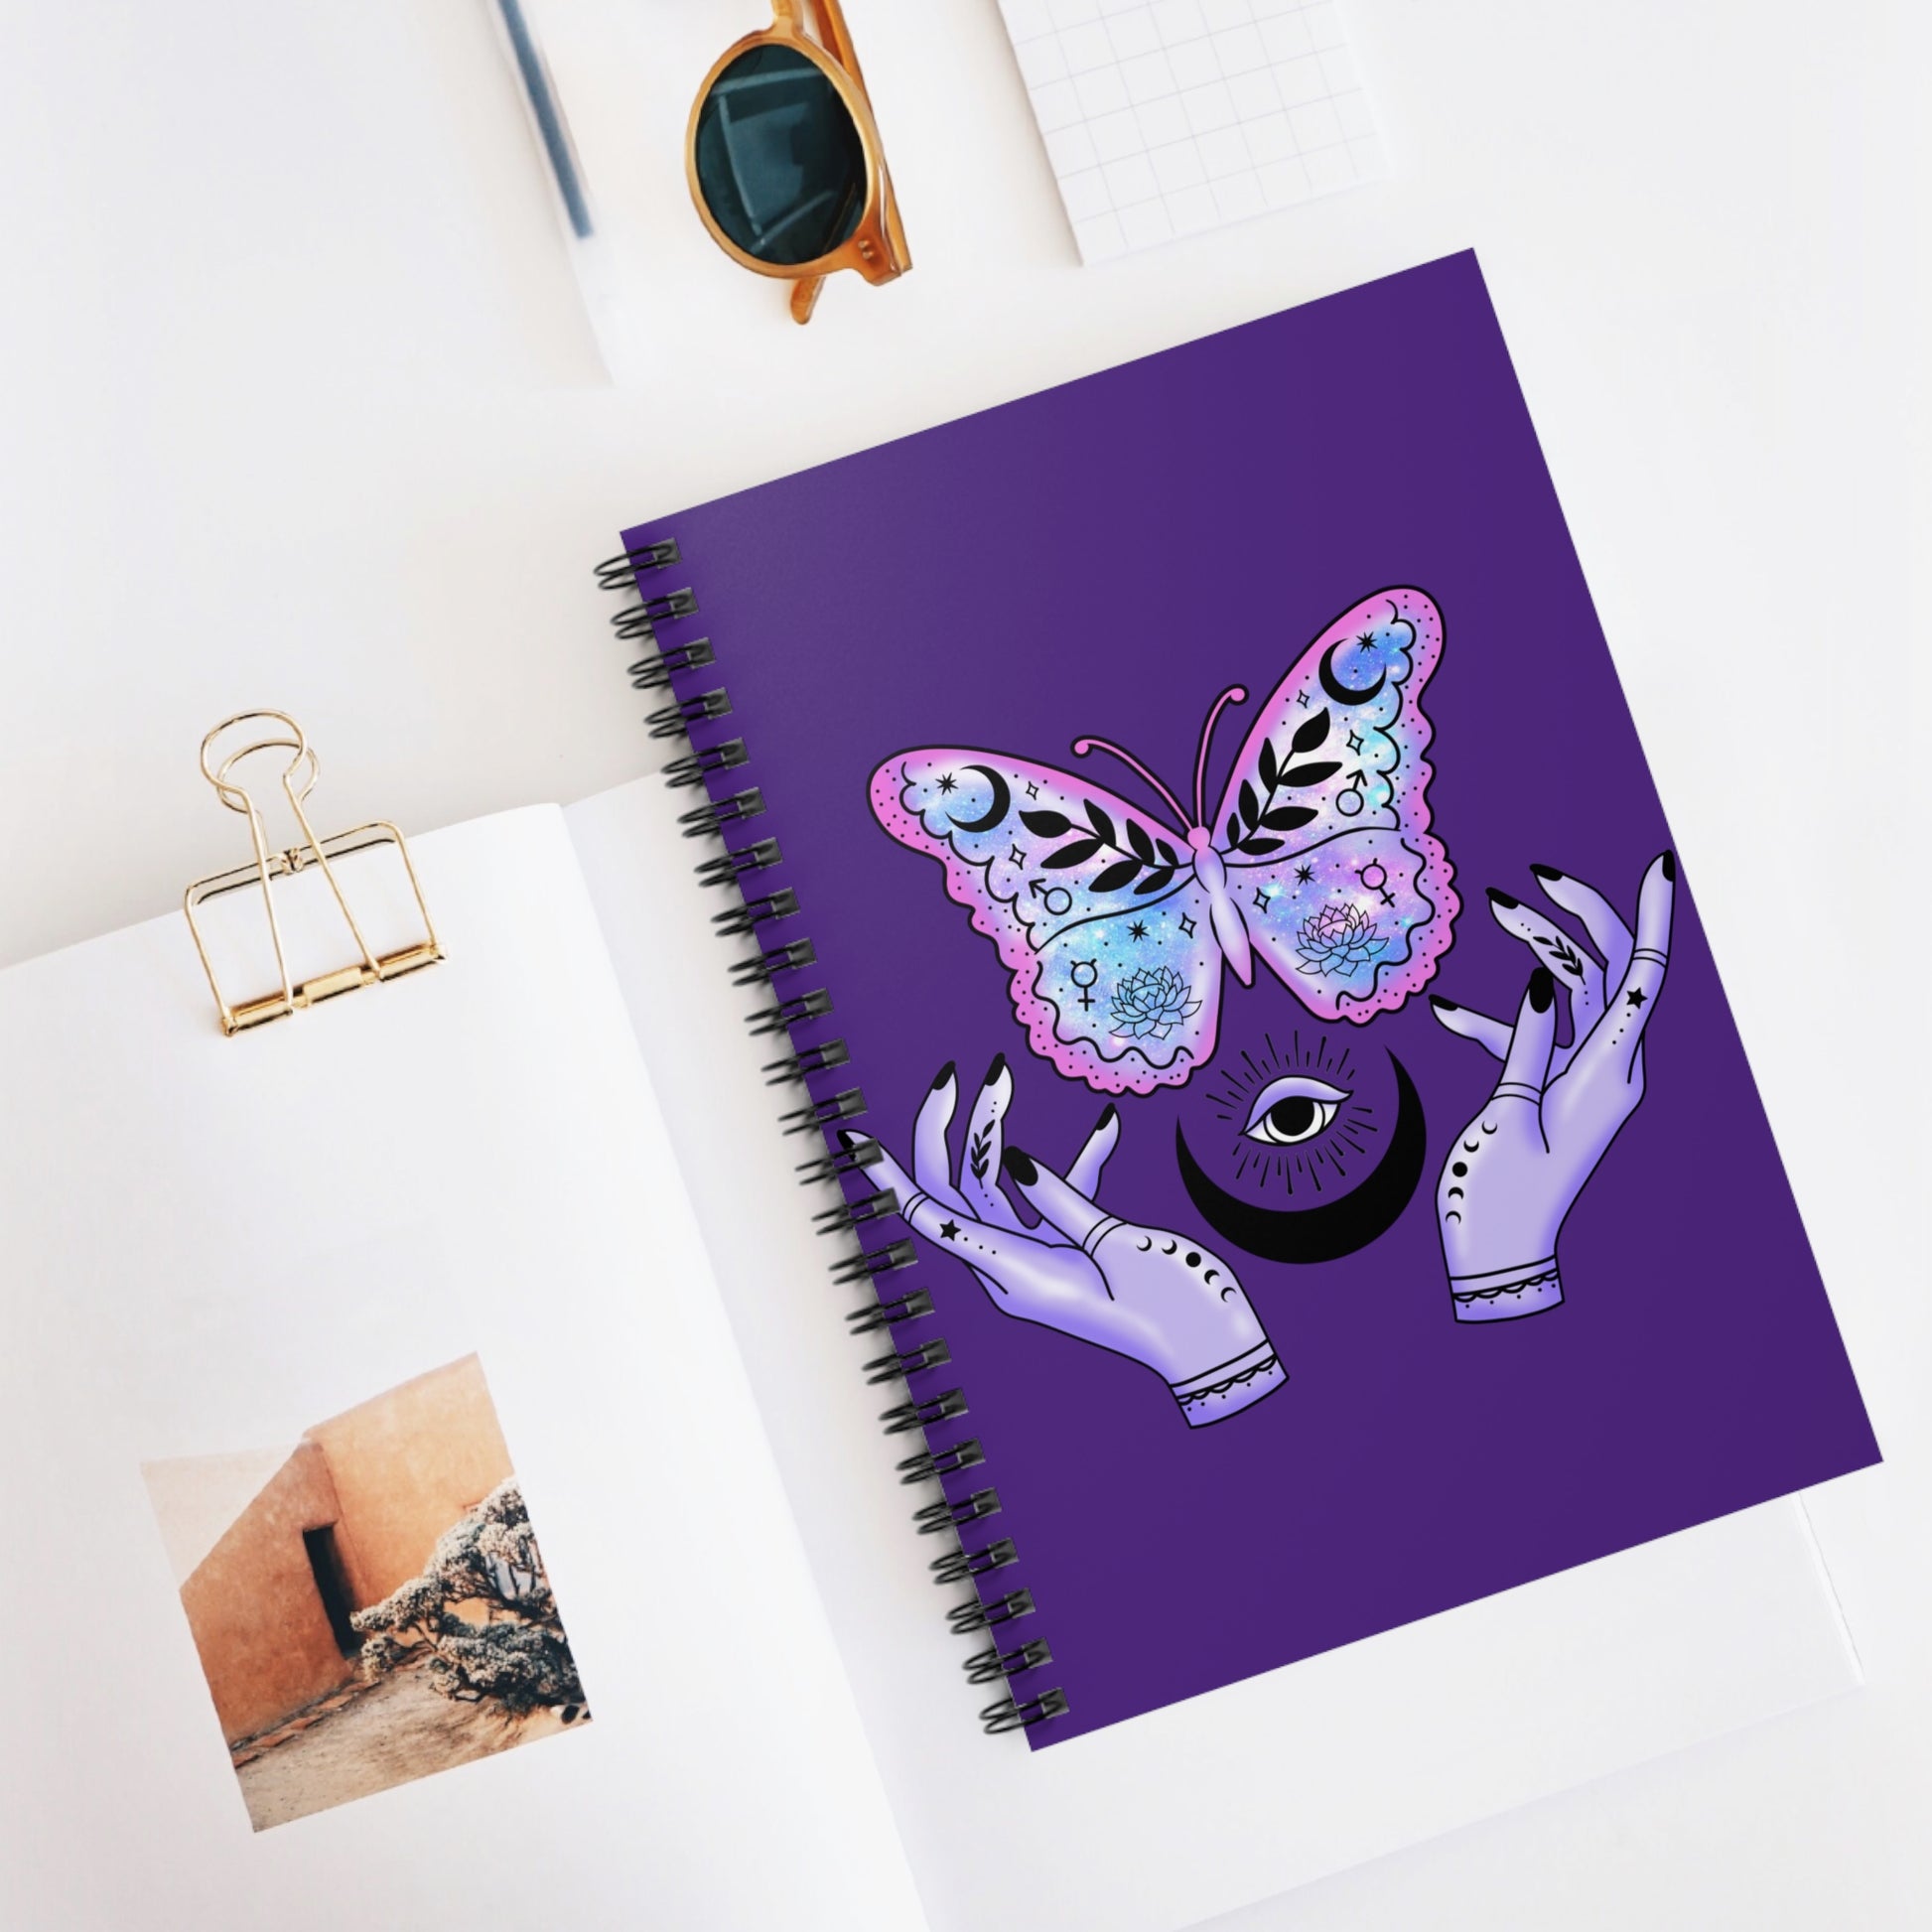 Mystical Magic: Spiral Notebook - Log Books - Journals - Diaries - and More Custom Printed by TheGlassyLass